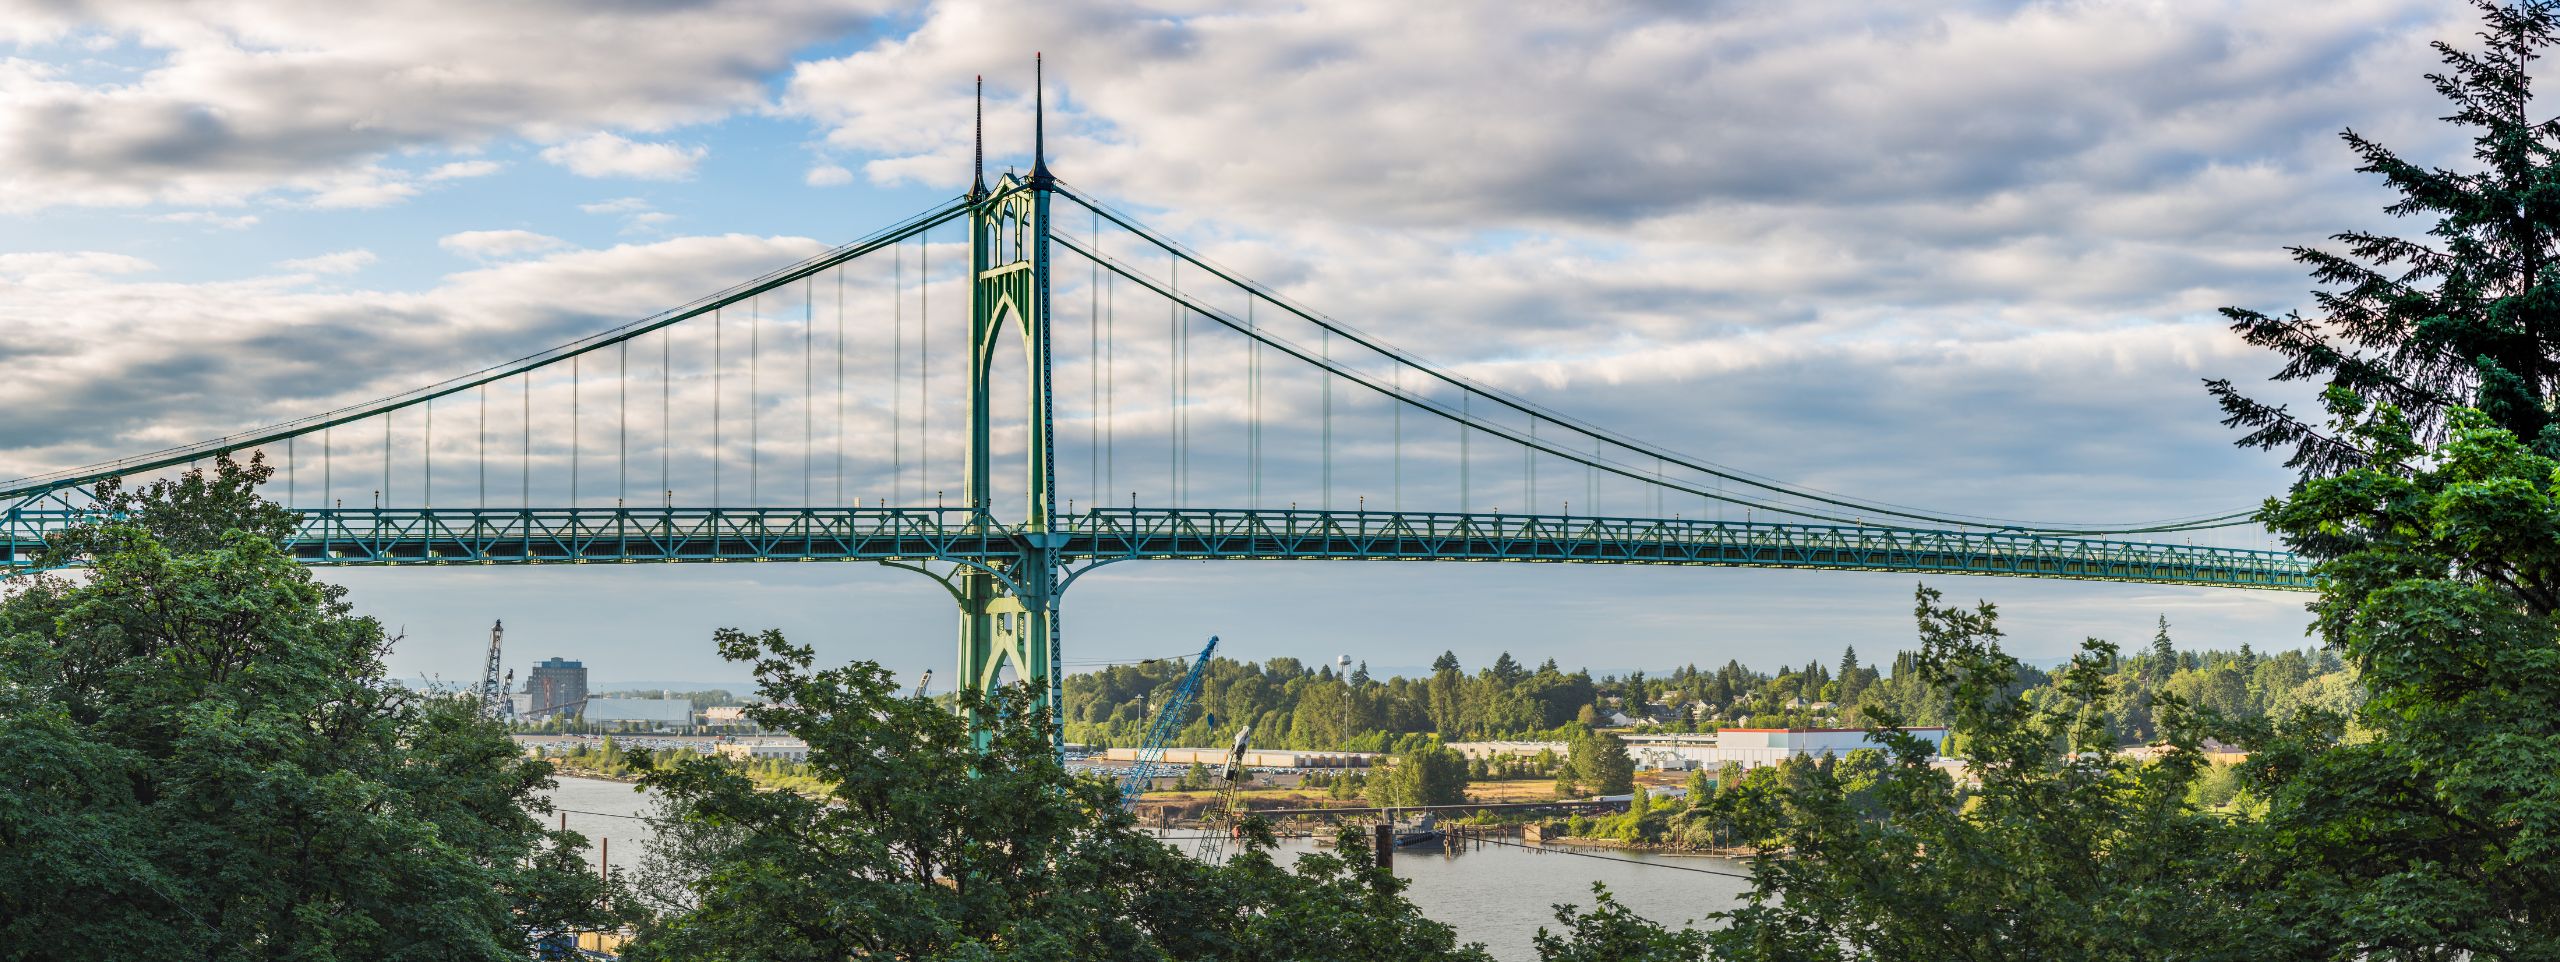 The St Johns Bridge in North Portland with a lovely partly cloudy background